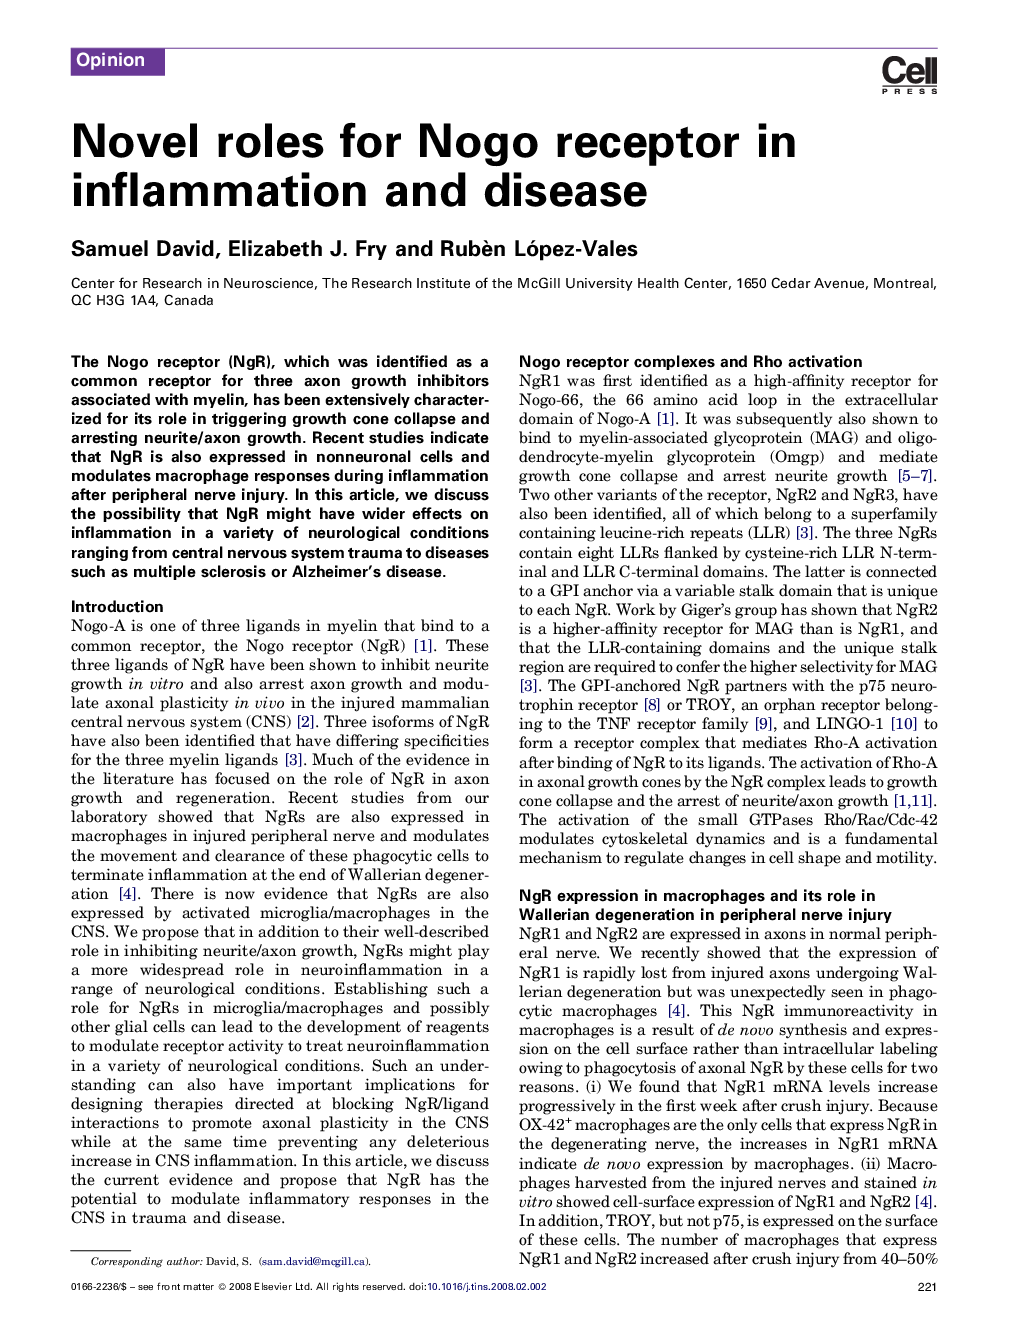 Novel roles for Nogo receptor in inflammation and disease